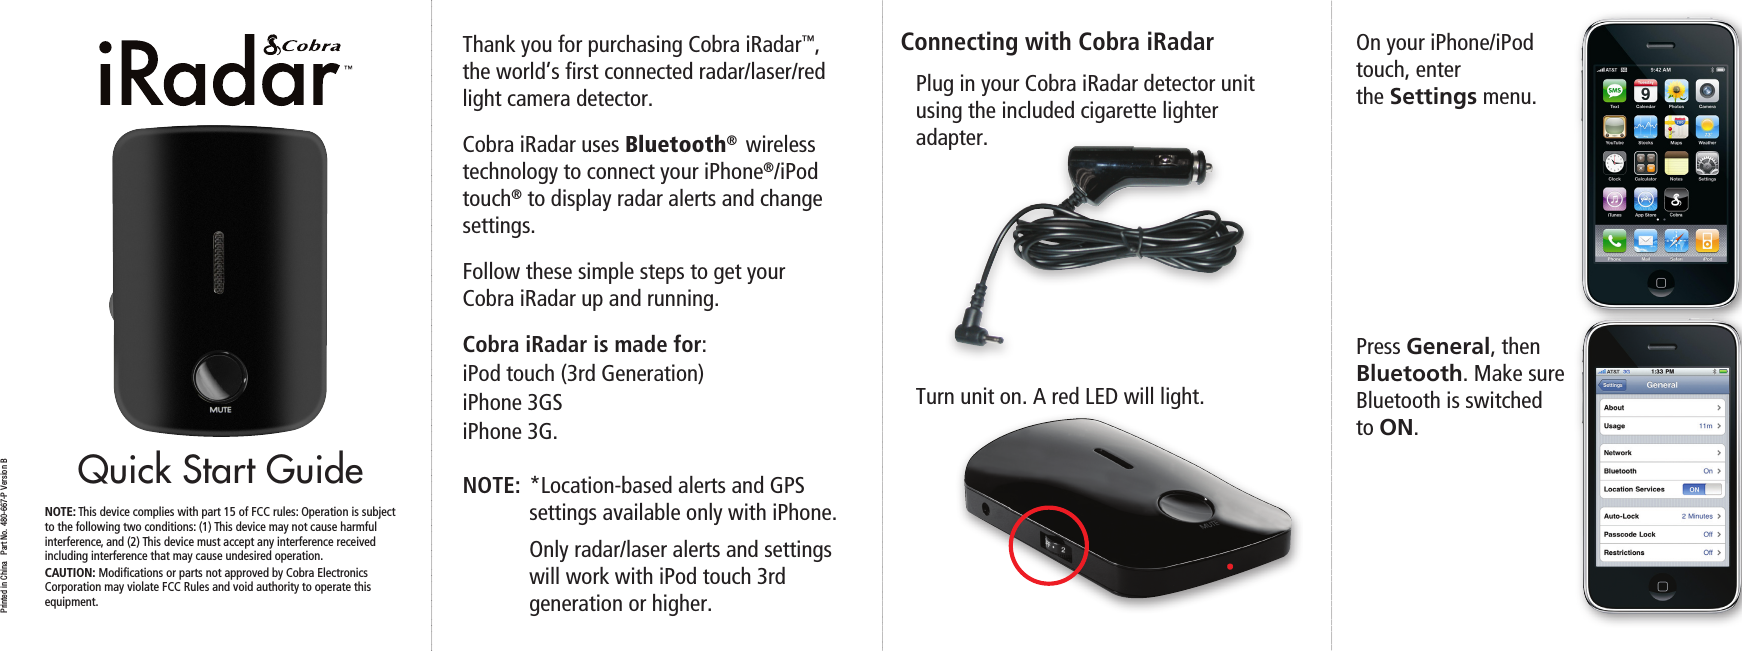 Quick Start GuidePrinted in China   Part No. 480-667-P Version BThank you for purchasing Cobra iRadar™, the world’s ﬁrst connected radar/laser/red light camera detector. Cobra iRadar uses Bluetooth®  wireless technology to connect your iPhone®/iPod touch® to display radar alerts and change settings.Follow these simple steps to get your  Cobra iRadar up and running.Cobra iRadar is made for: iPod touch (3rd Generation) iPhone 3GSiPhone 3G.NOTE:  *Location-based alerts and GPS   settings available only with iPhone.   Only radar/laser alerts and settings    will work with iPod touch 3rd    generation or higher.Connecting with Cobra iRadarPlug in your Cobra iRadar detector unit using the included cigarette lighter adapter.Turn unit on. A red LED will light.On your iPhone/iPod  touch, enter  the Settings menu.Press General, then Bluetooth. Make sure Bluetooth is switched  to ON.NOTE: This device complies with part 15 of FCC rules: Operation is subject to the following two conditions: (1) This device may not cause harmful  interference, and (2) This device must accept any interference received  including interference that may cause undesired operation.CAUTION: Modiﬁcations or parts not approved by Cobra Electronics Corporation may violate FCC Rules and void authority to operate this  equipment.